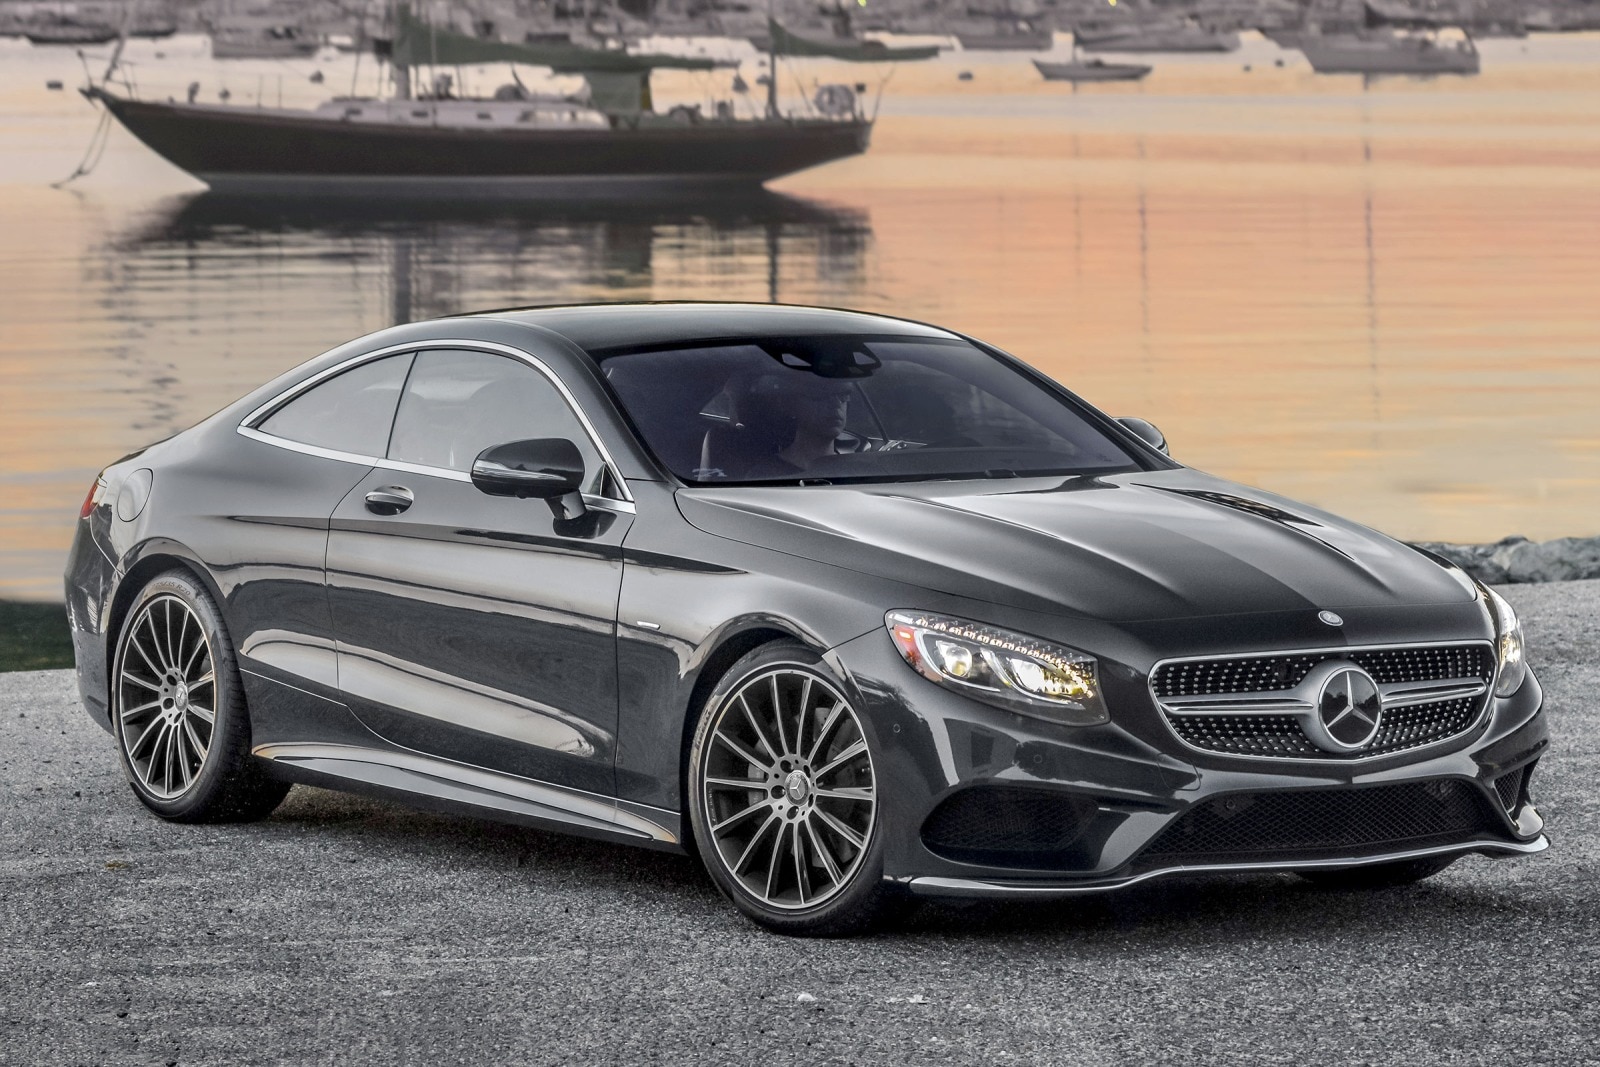 Used 2016 Mercedes-Benz S-Class Coupe Review | Edmunds